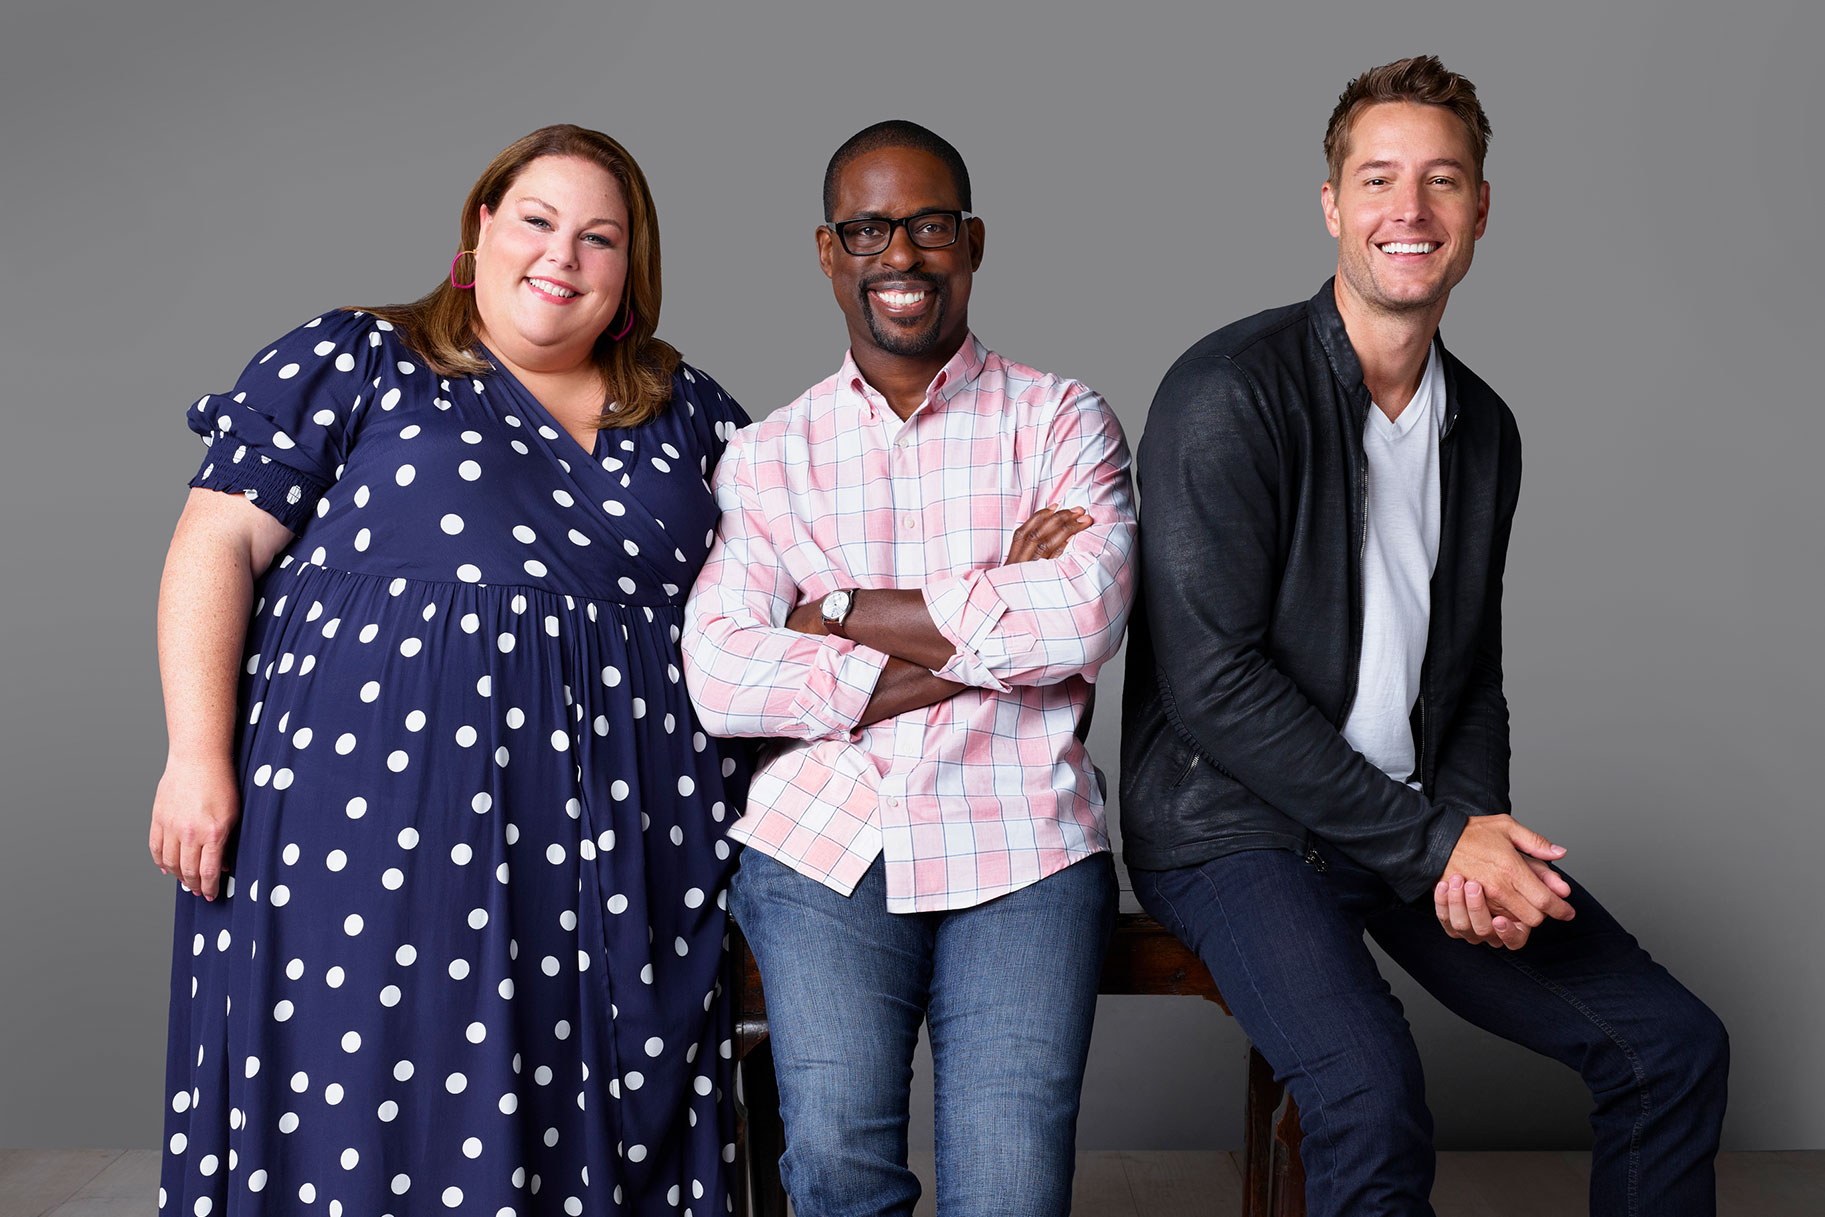 This Is Us: The Big Three Kate, Kevin, Randall Actors Through the Years